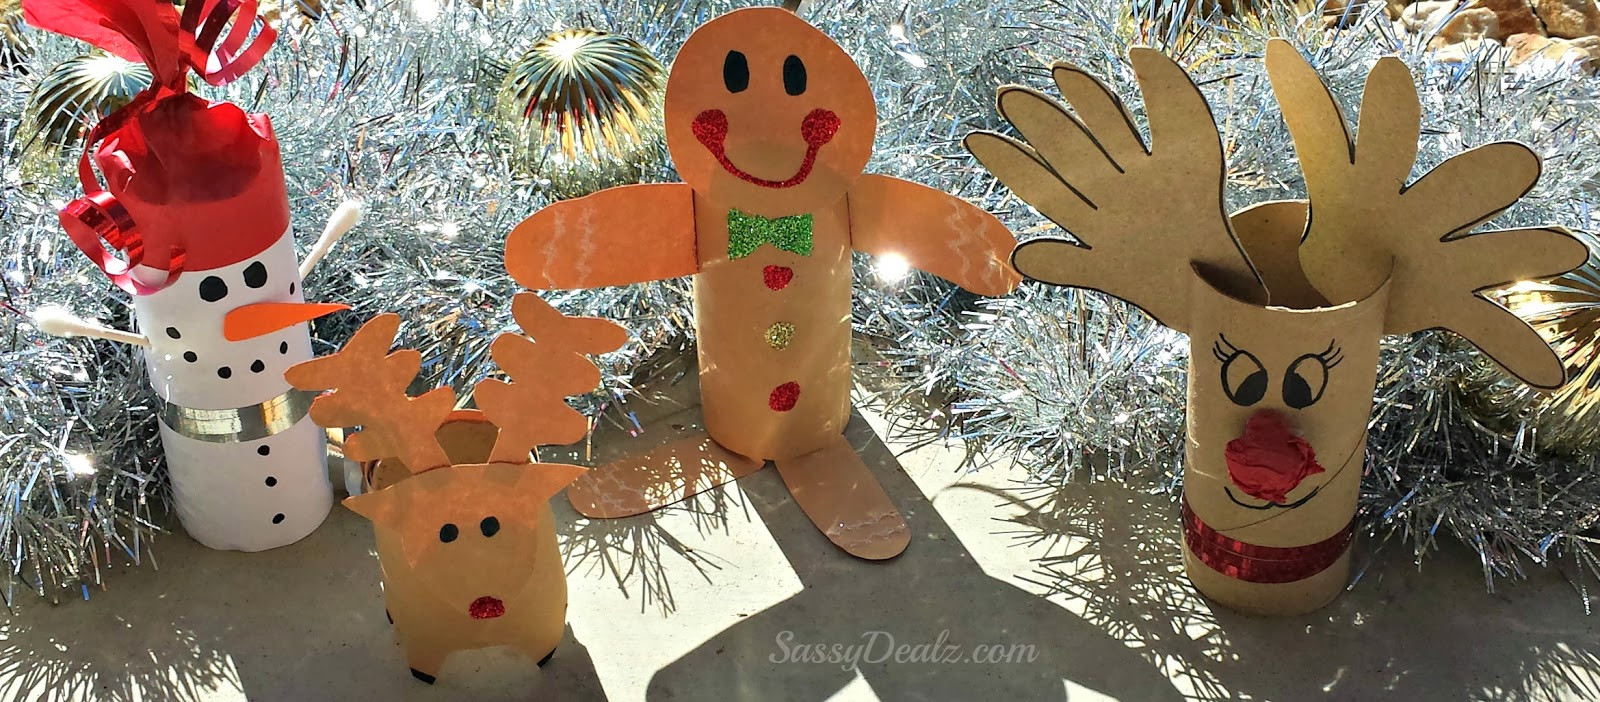 Toilet Paper Roll Christmas Crafts
 DIY Christmas Toilet Paper Roll Craft Ideas For Kids